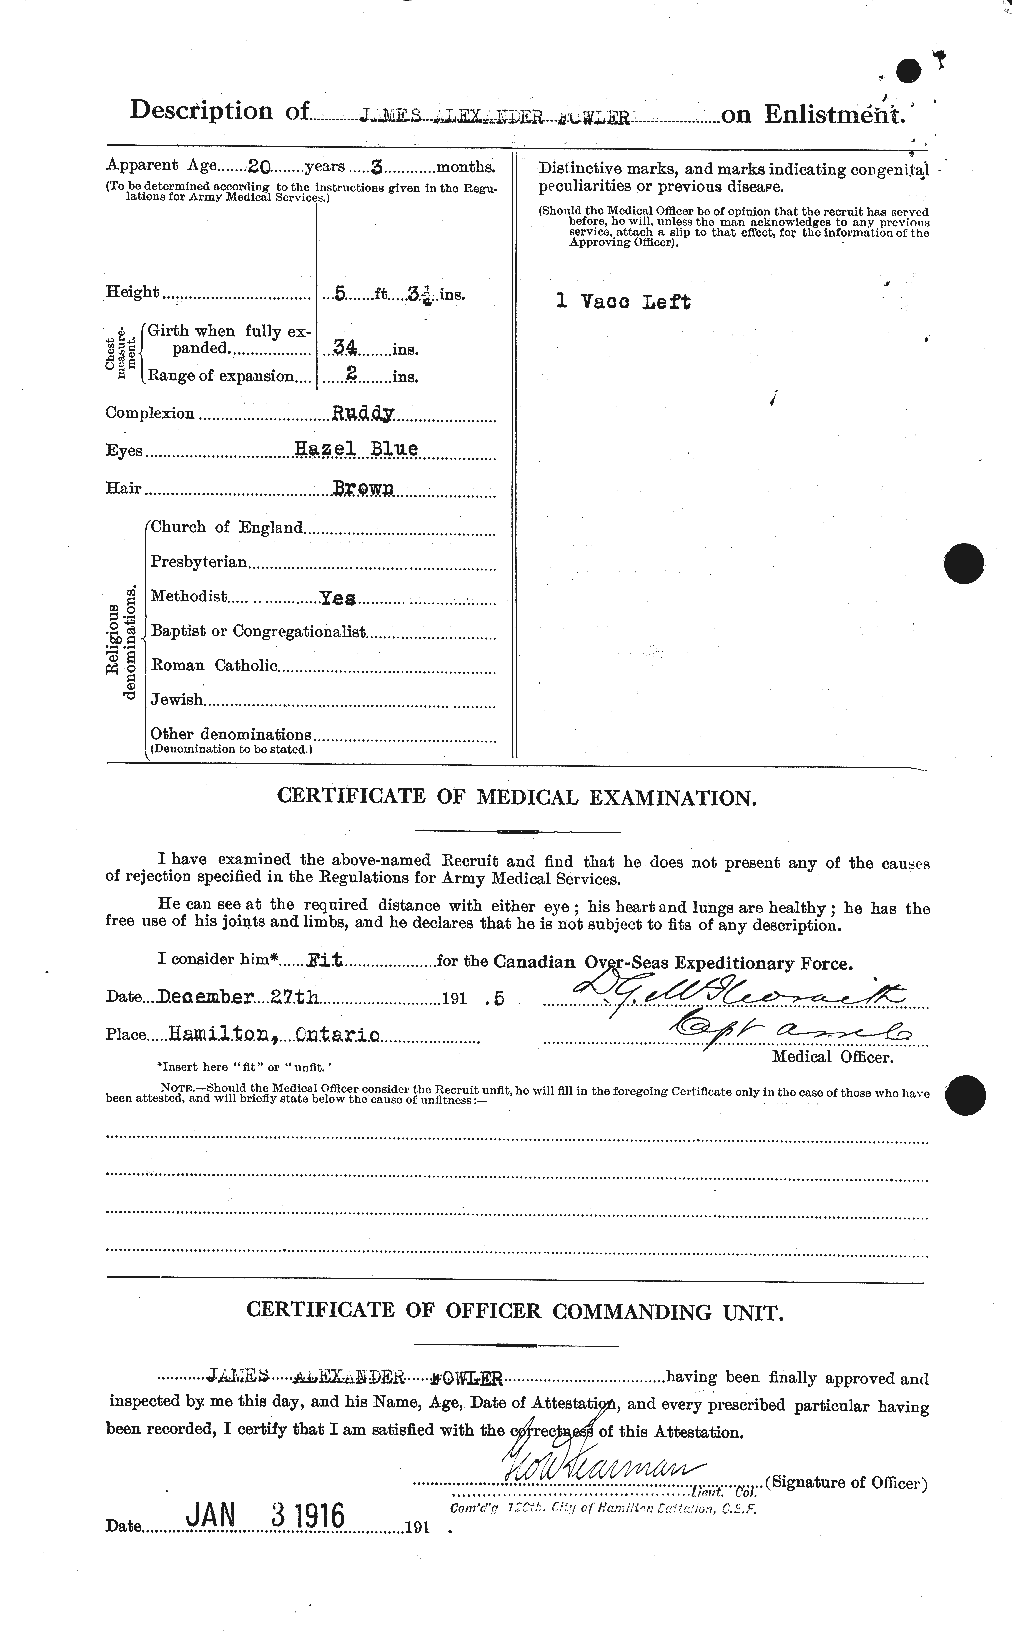 Personnel Records of the First World War - CEF 333098b